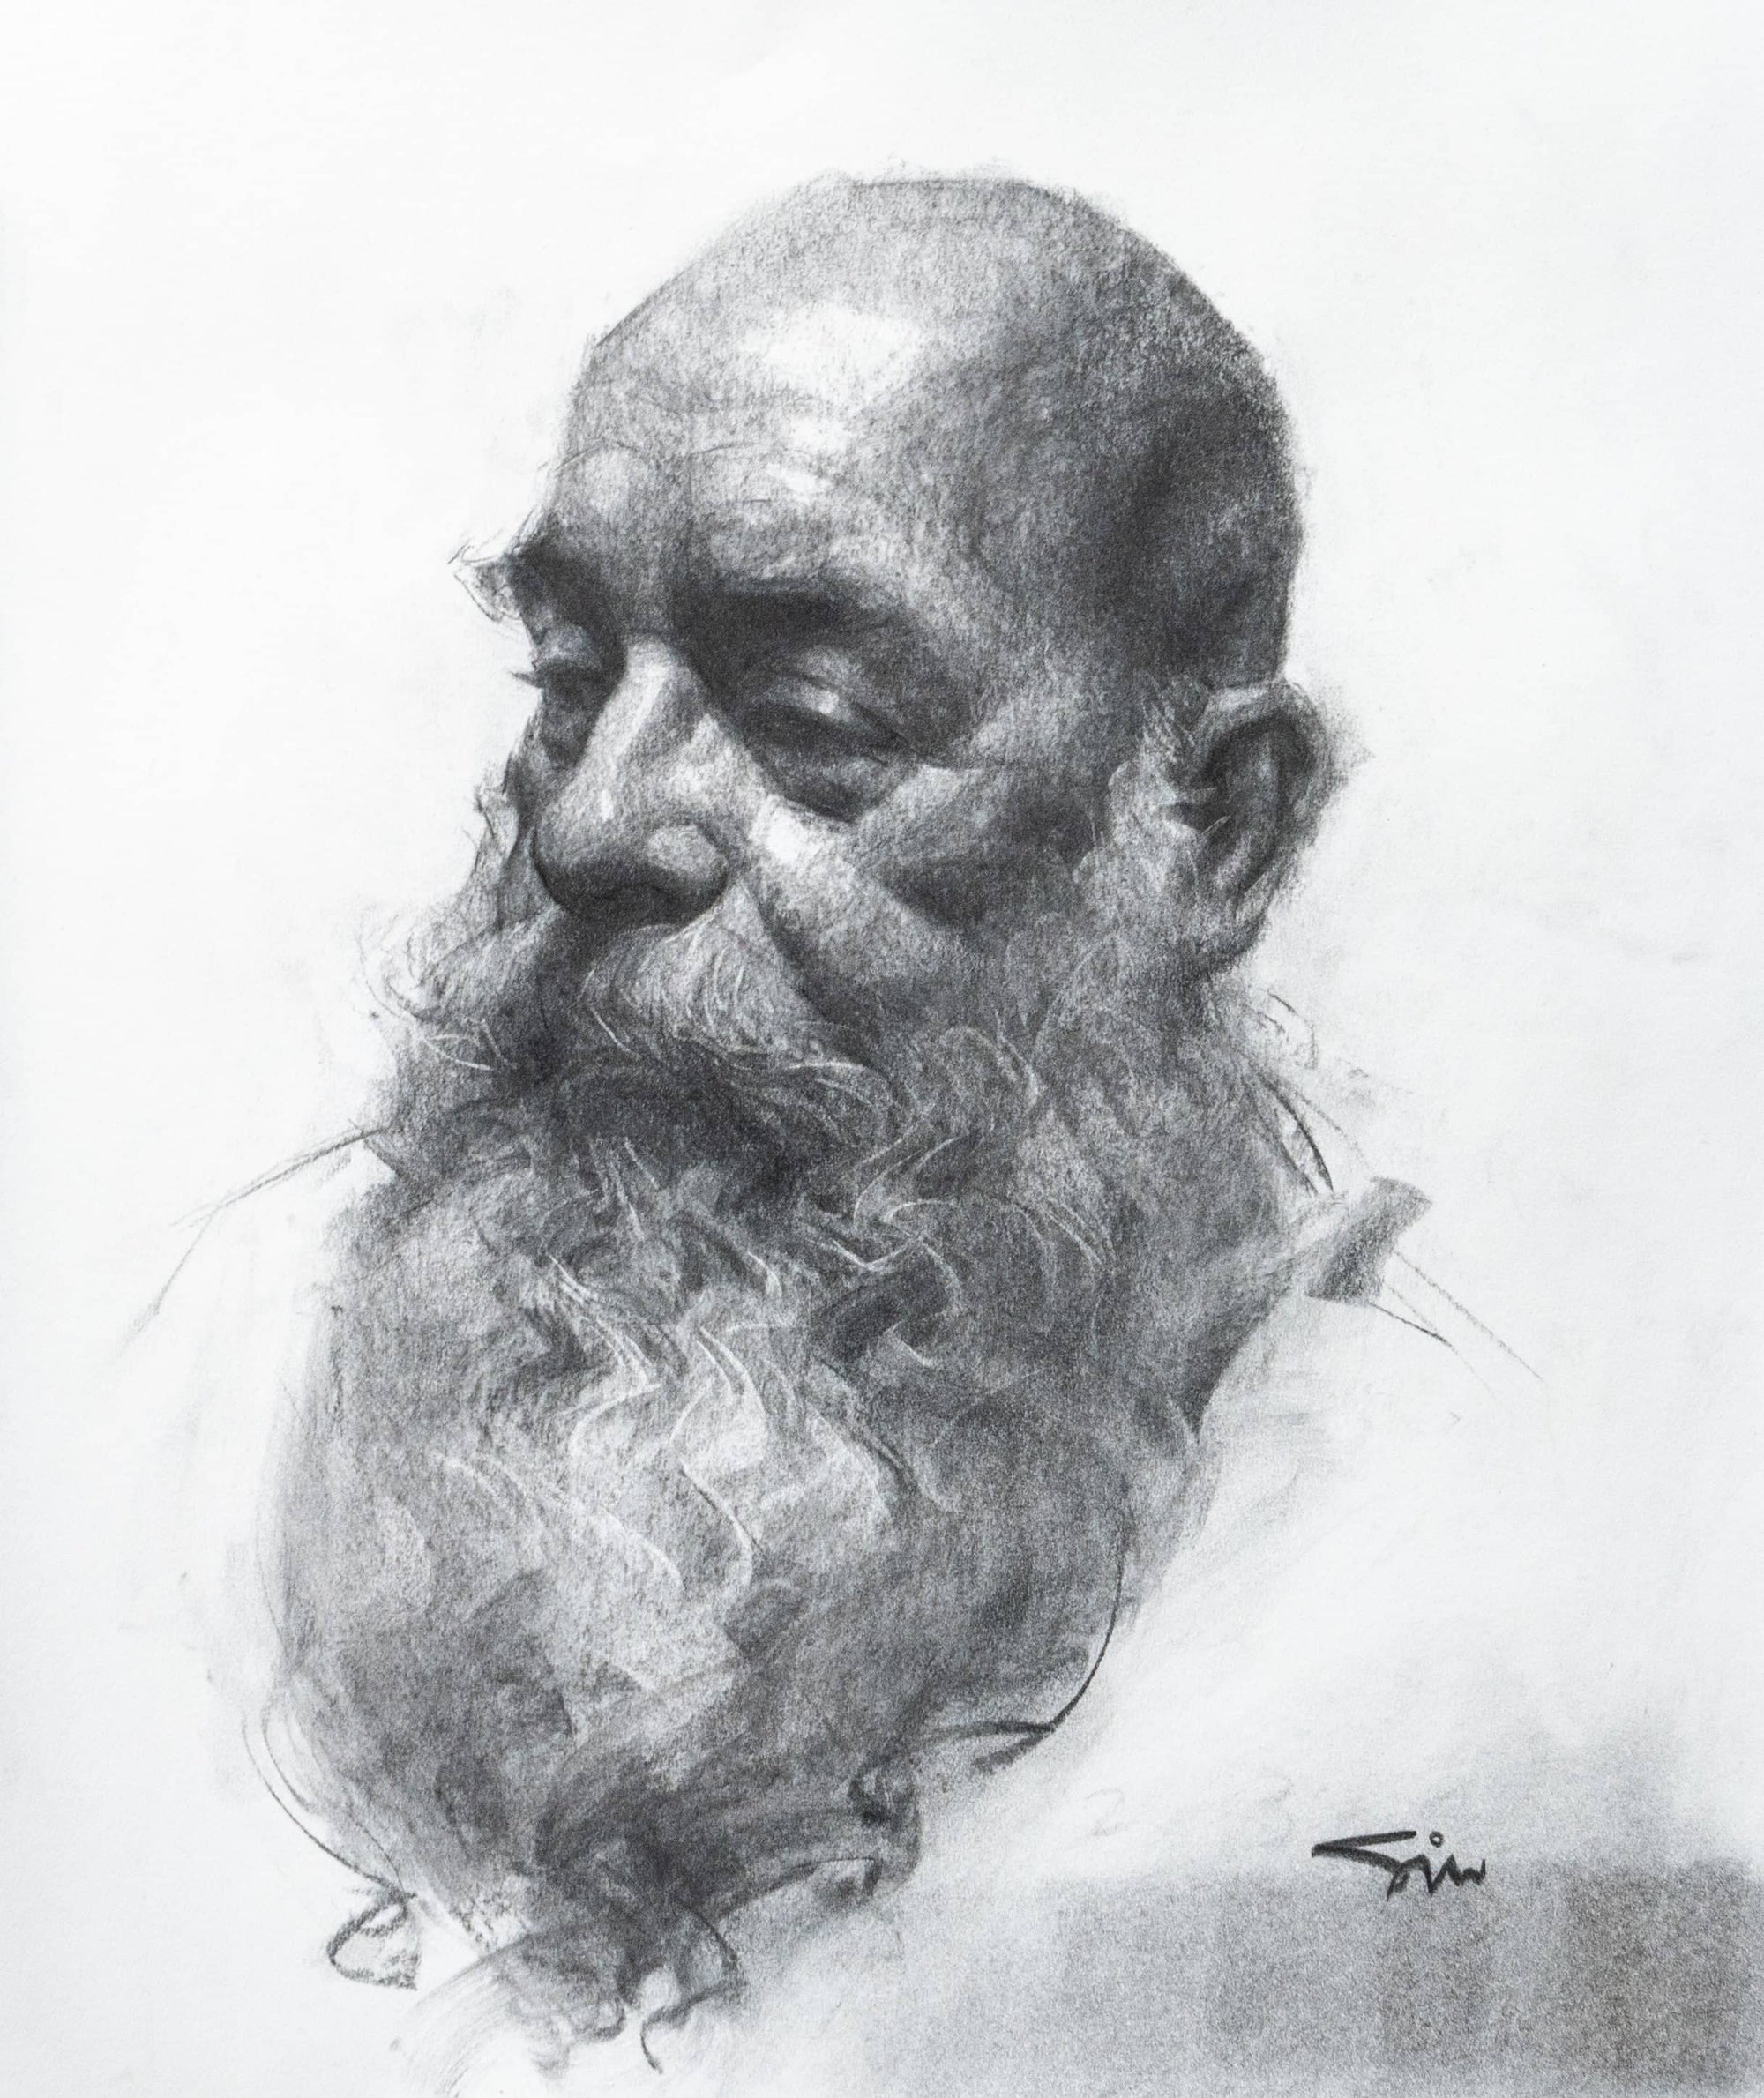 Charcoal pencil drawing portrait of a man - Other Hobbies - 1735848618